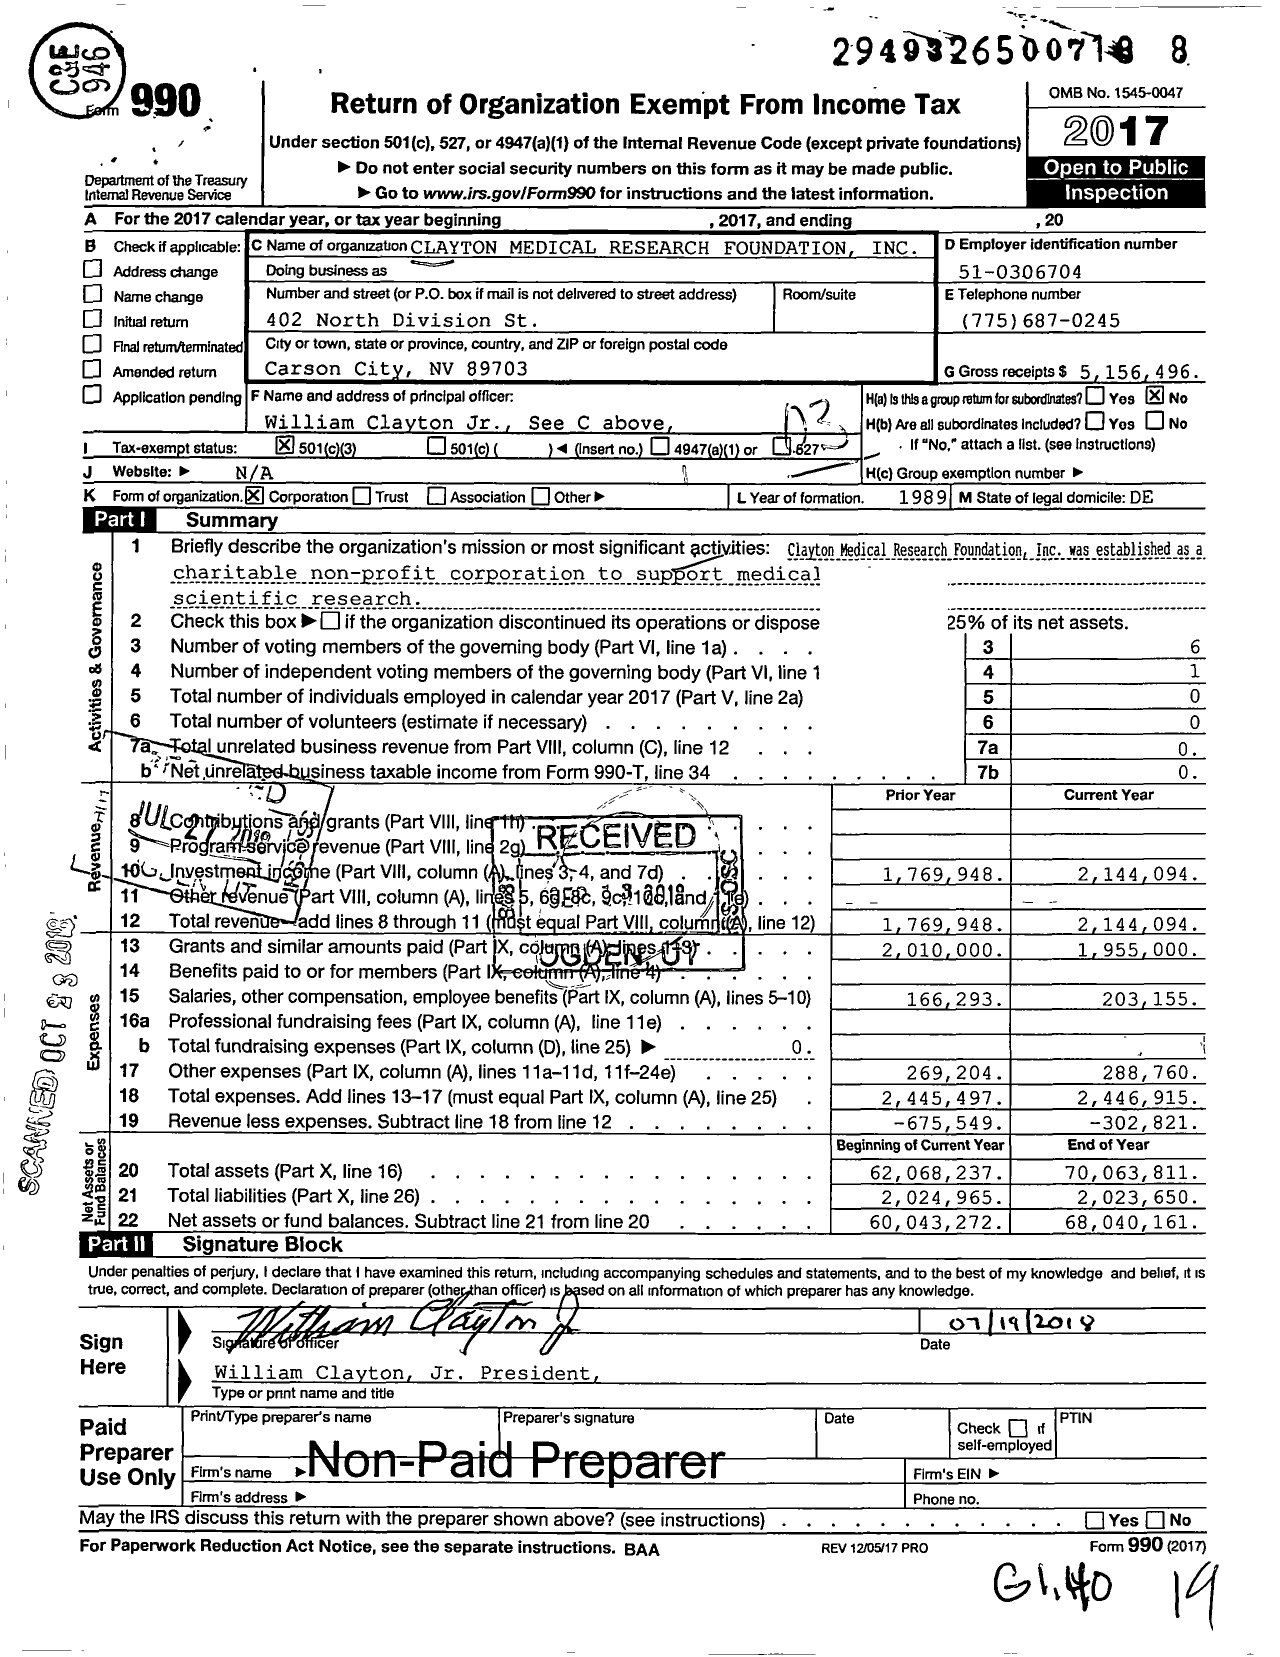 Image of first page of 2017 Form 990 for Clayton Medical Research Foundation